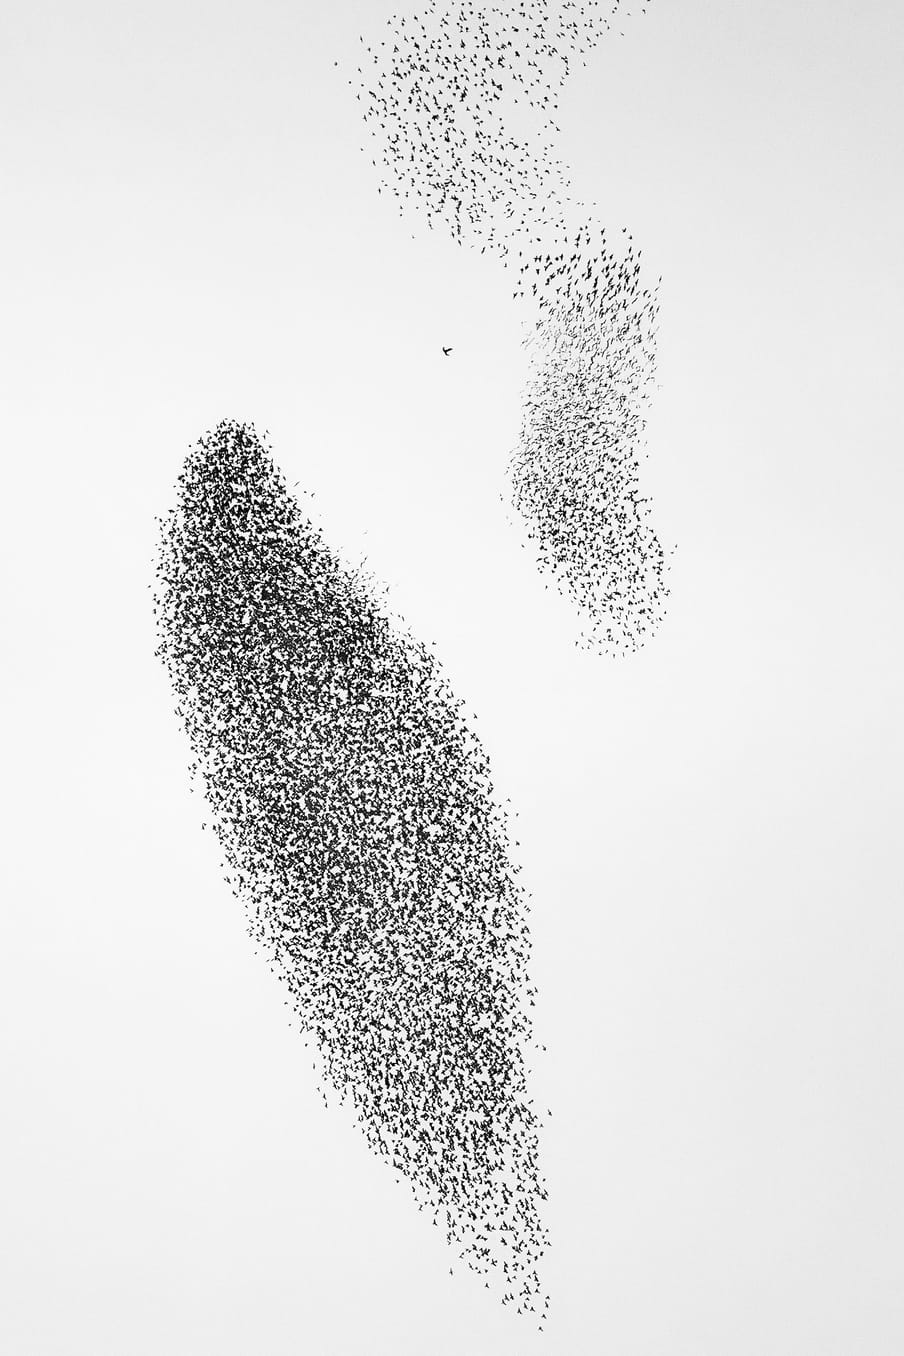 Photo of a flock of birds - against a white background